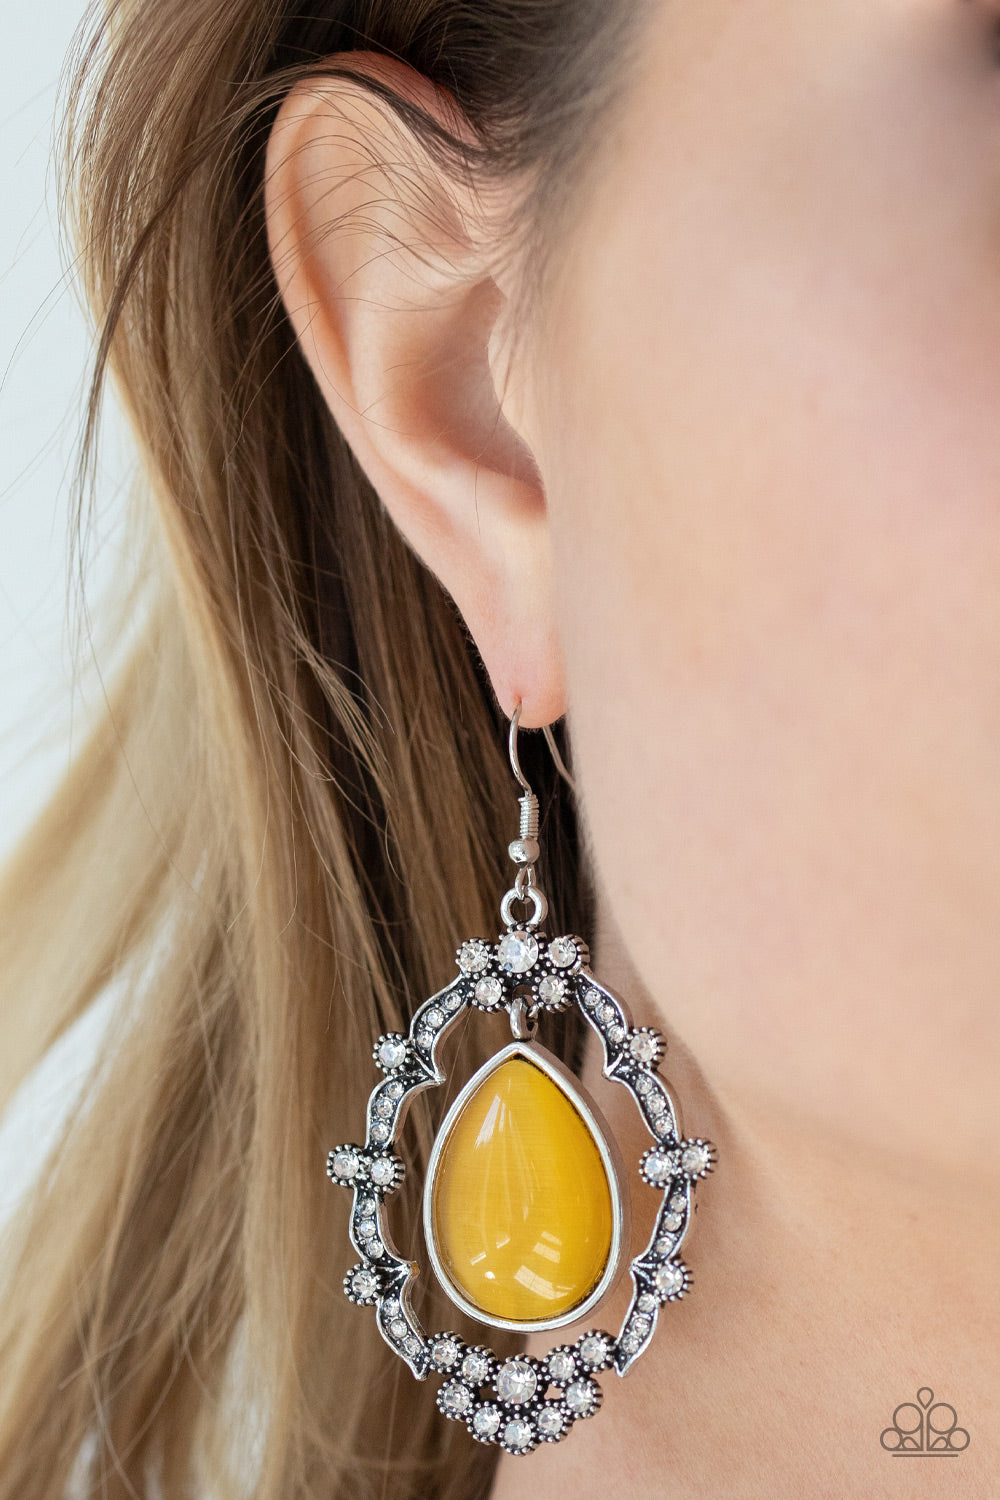 Paparazzi Icy Eden - Yellow Earrings $5 jewelry at AainaasTreasureBox. Get Free Shipping! 